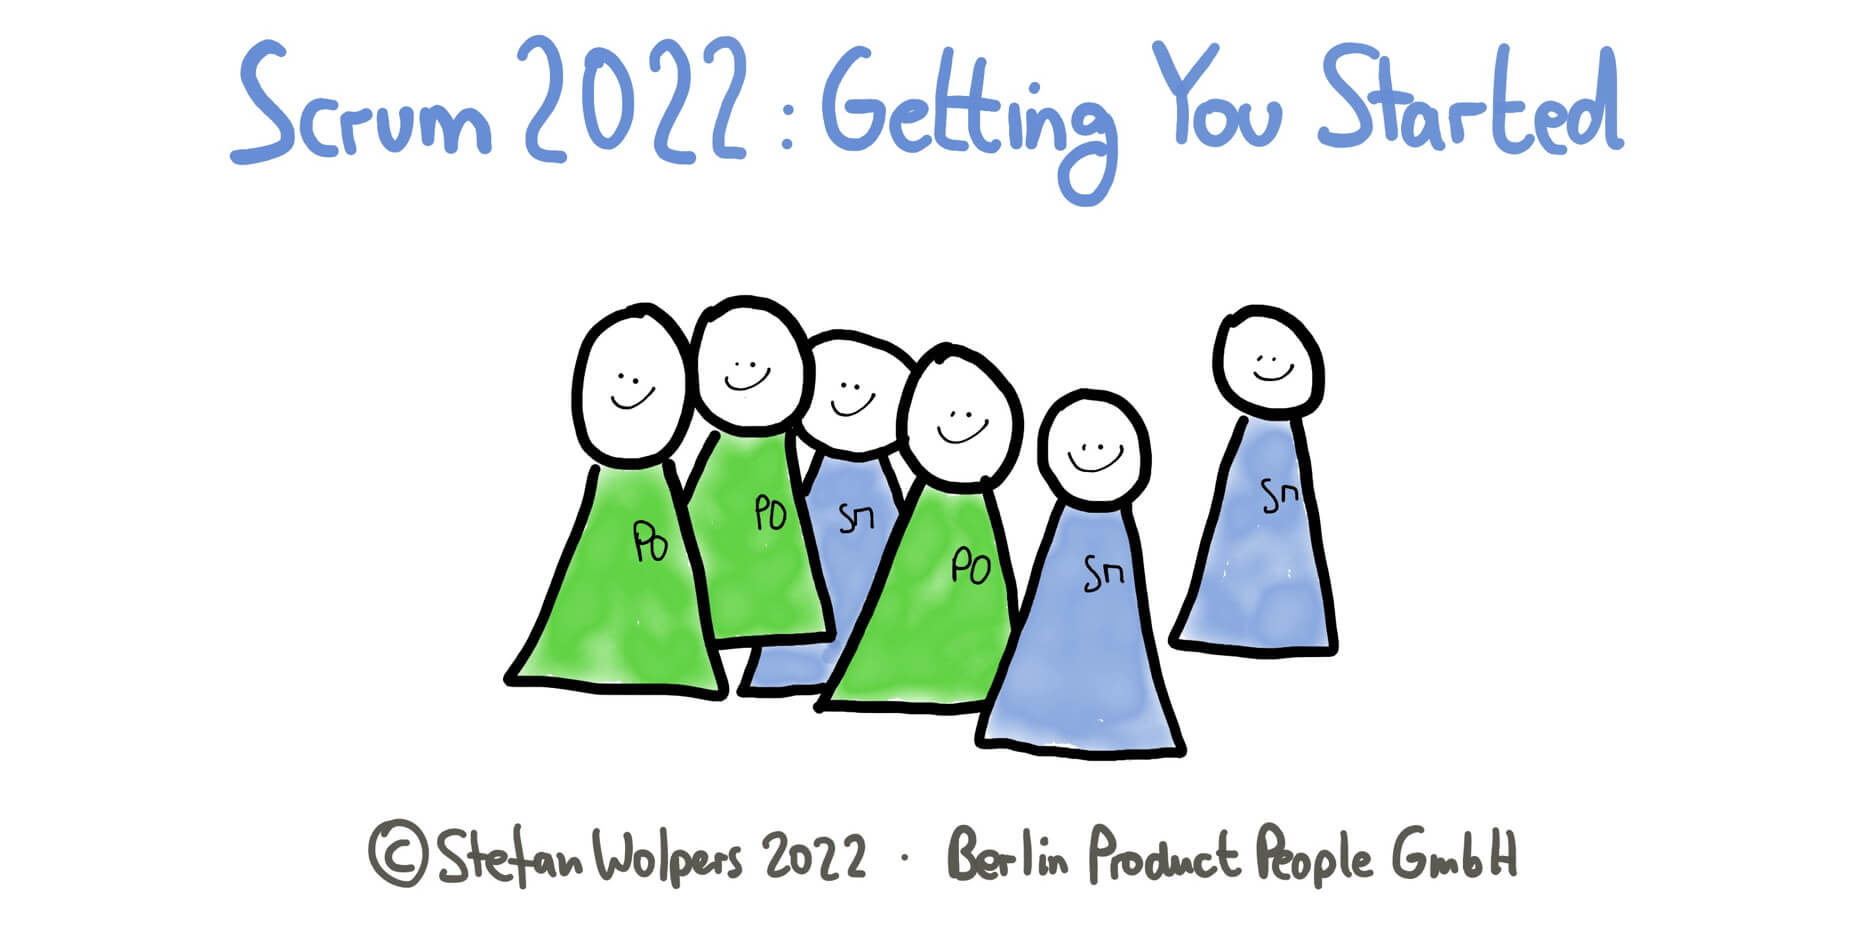 Scrum 2022: Getting You Started as Scrum Master or Product Owner — Berlin Product People GmbH